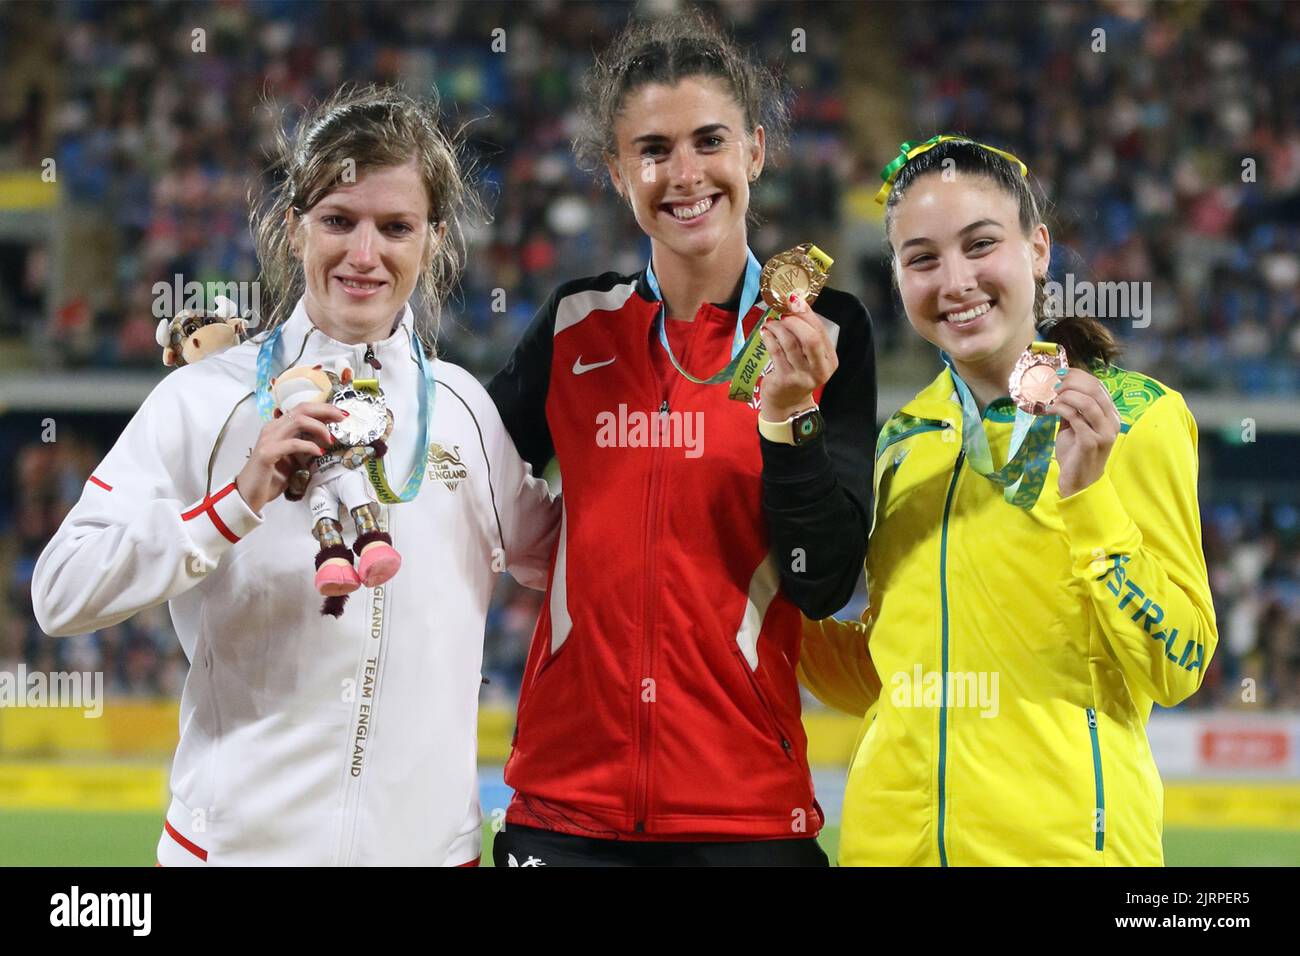 (L to R) Sophie HAHN of England (silver), Olivia BREEN of Wales (gold), Rhiannon CLARKE of Australia (bronze) in the Women's T37 / T38 100m - Final at the 2022 Commonwealth games in Birmingham. Stock Photo